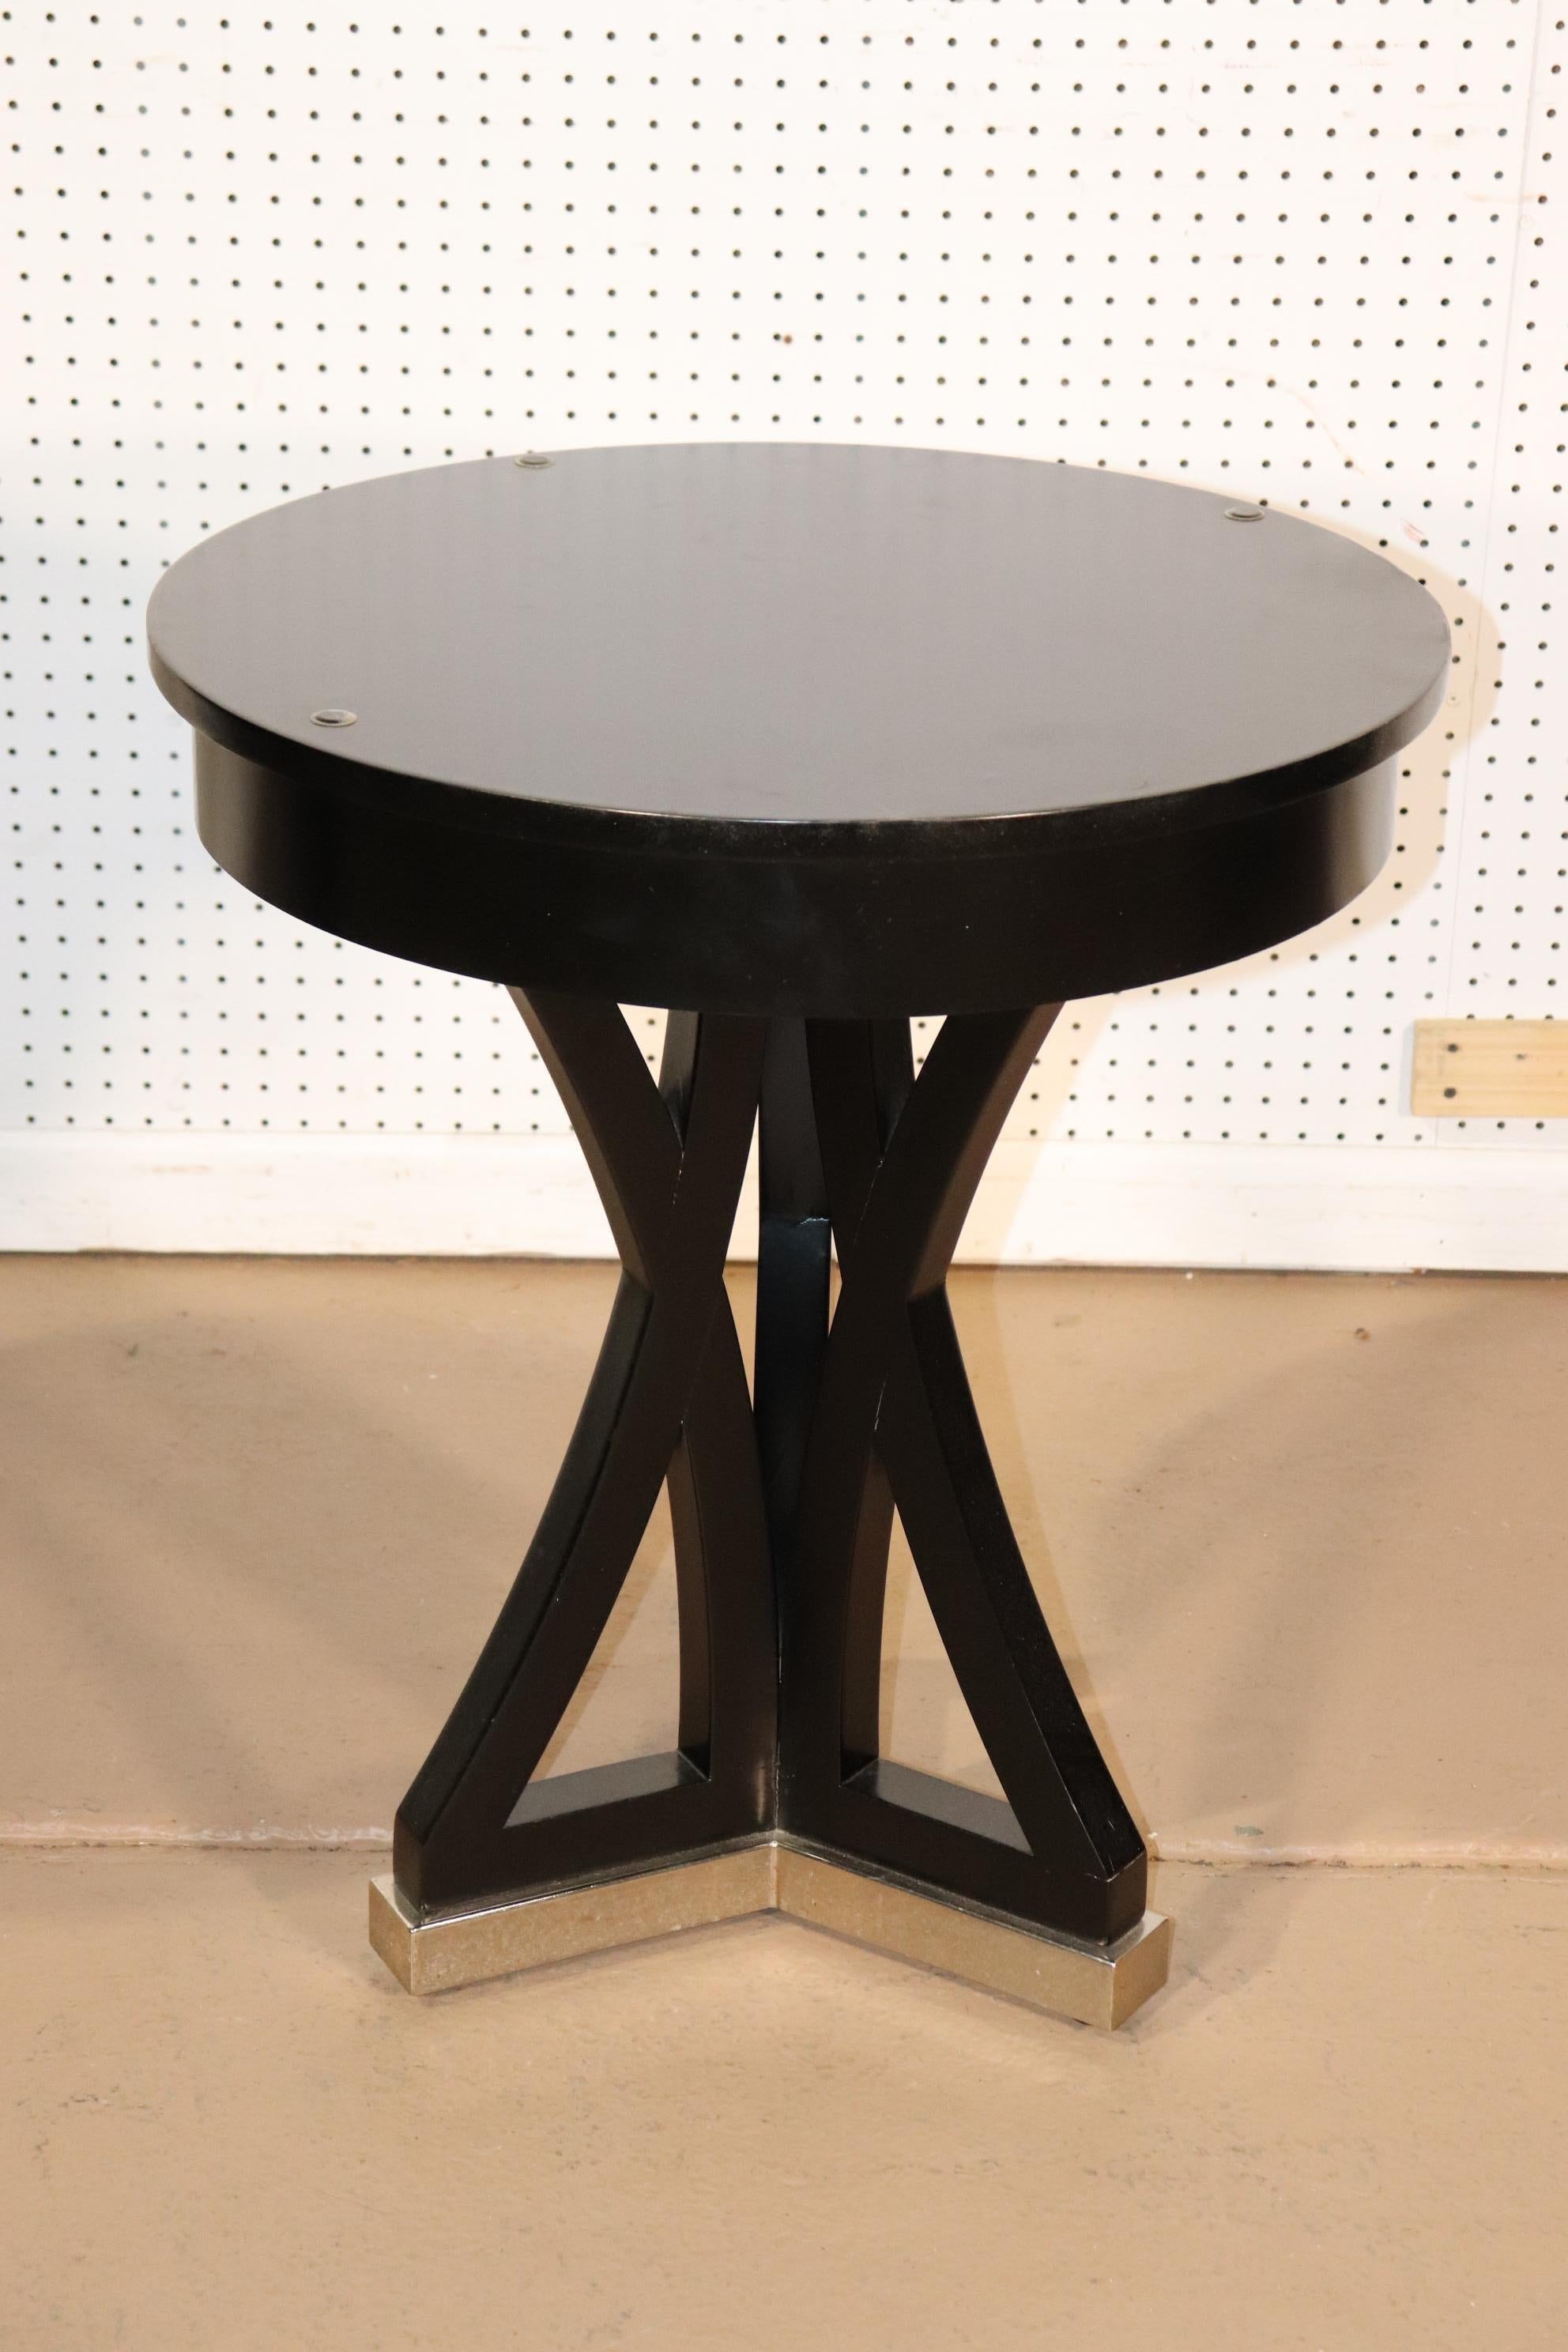 These attractive tables measure 24 wide x 24 deep x 28 tall.